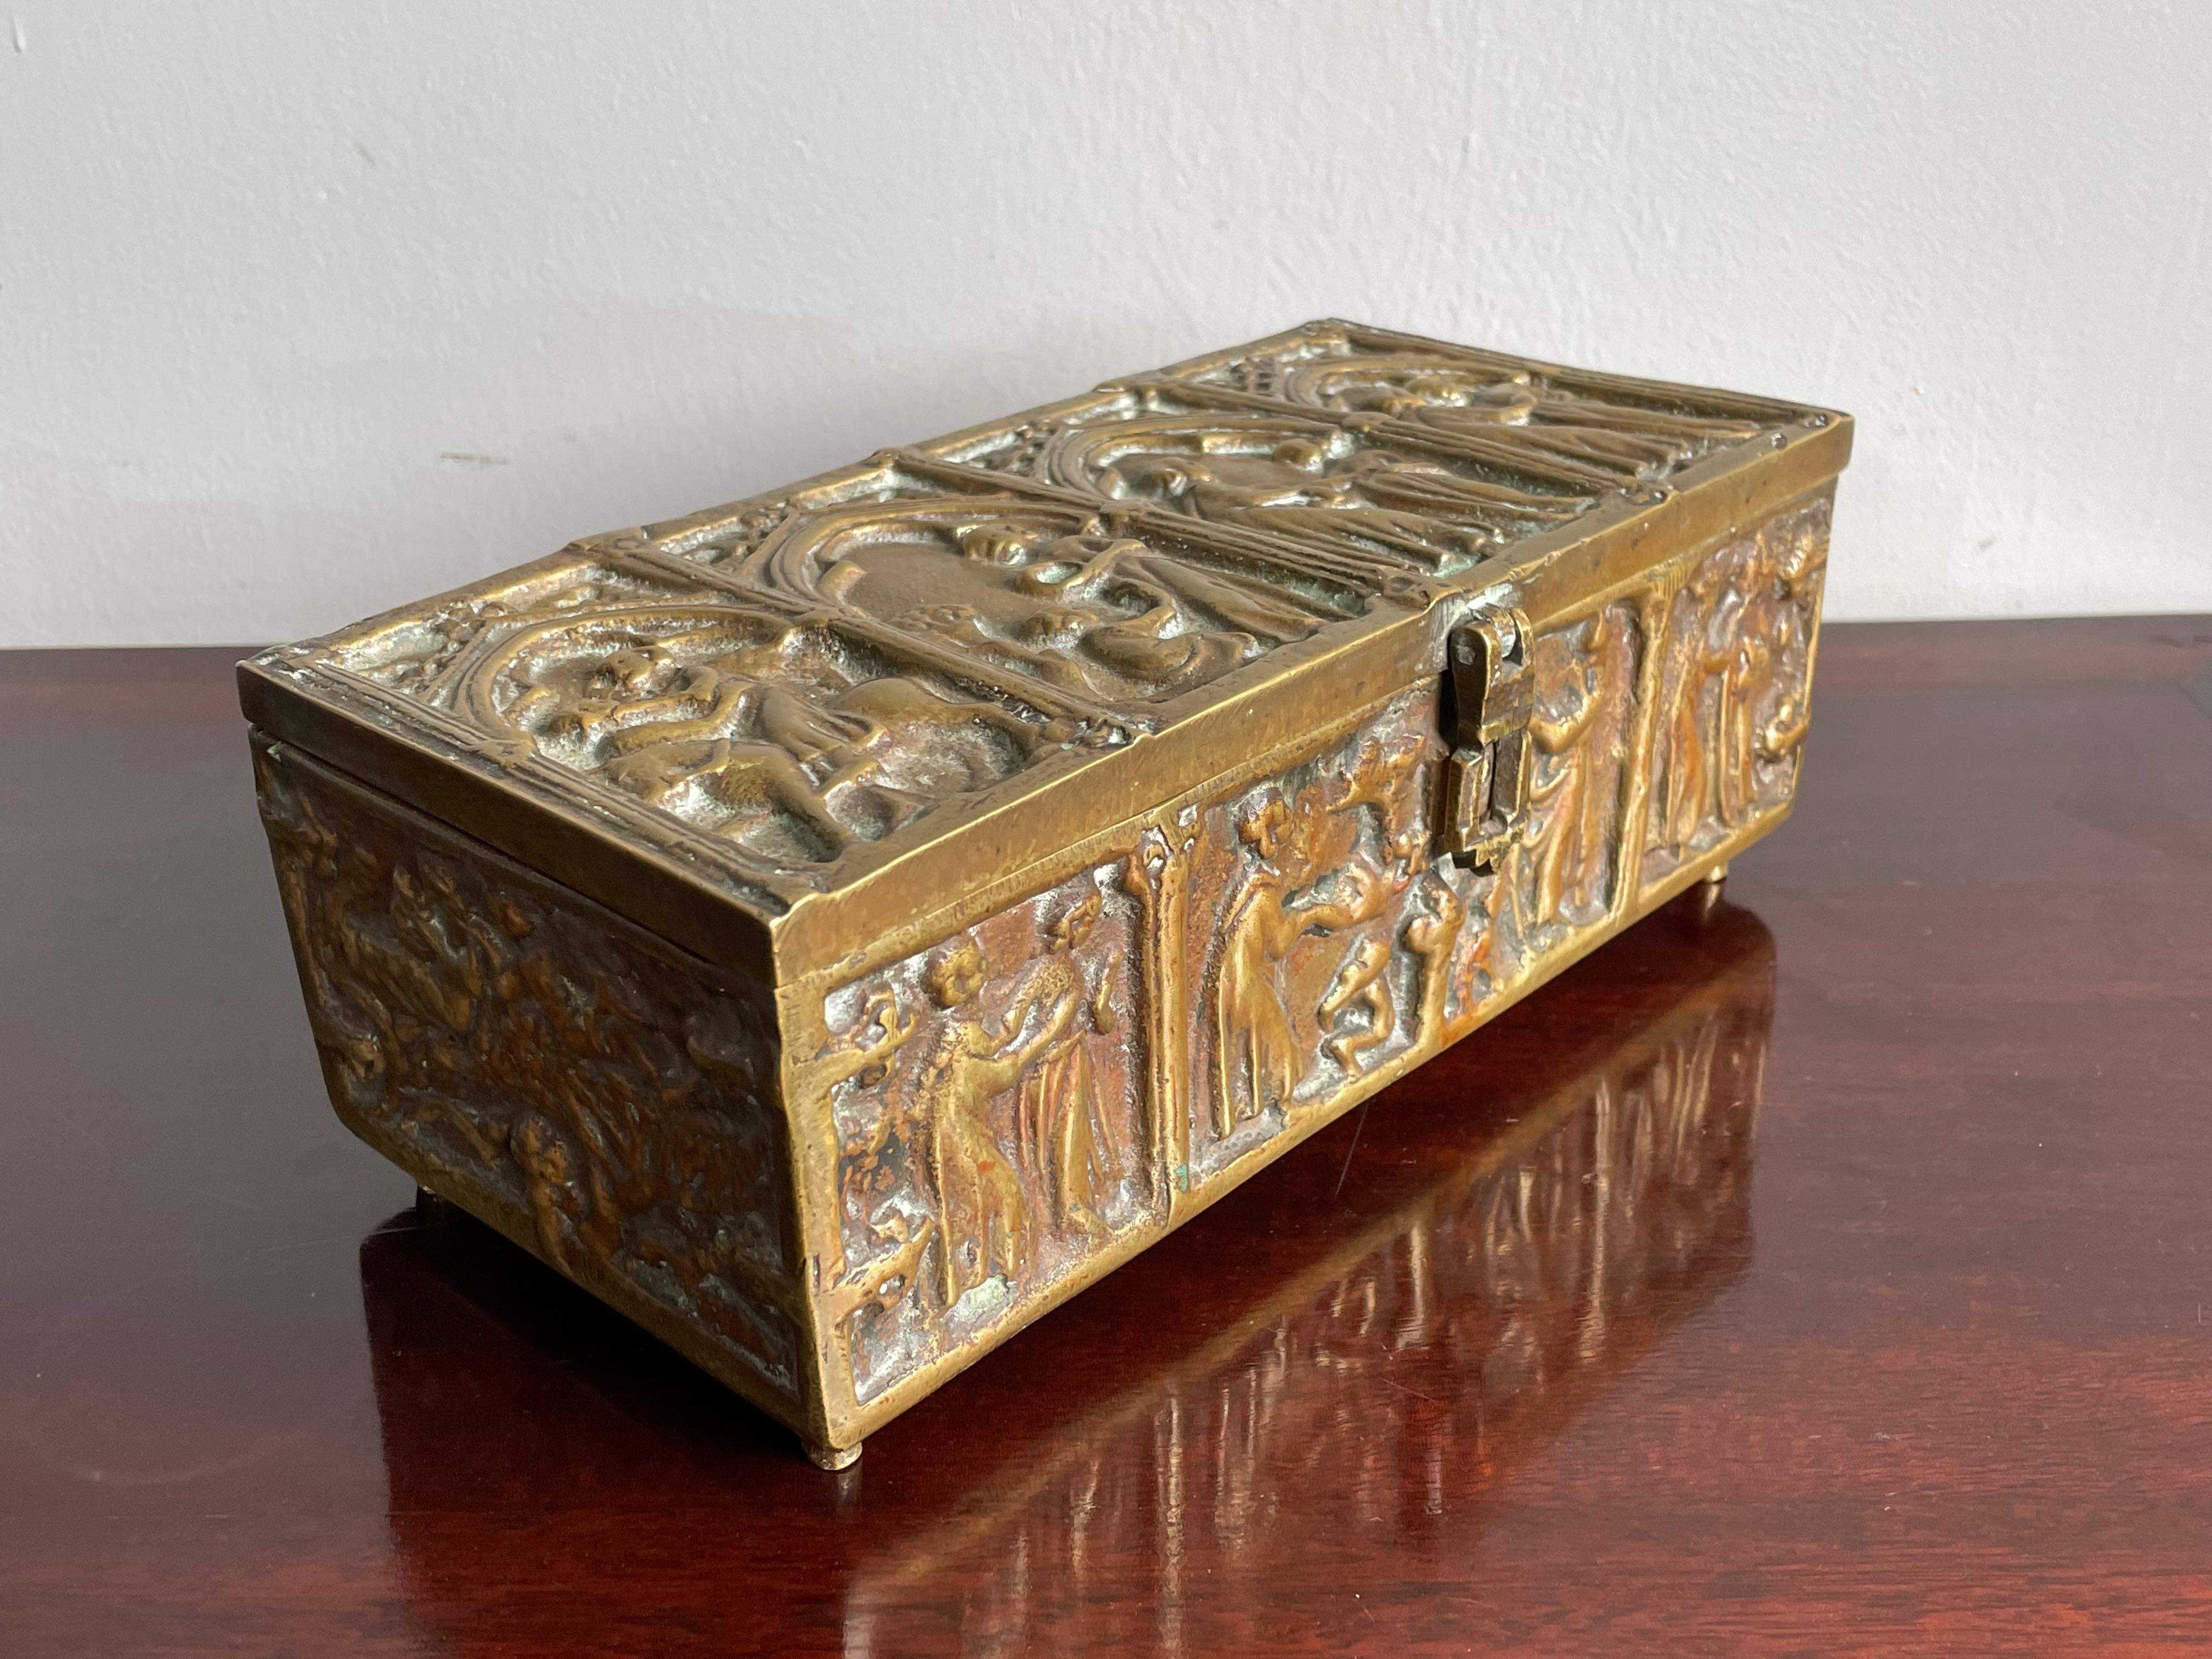 Wonderfully decorative, intricate and good condition, 19th century box.

Over the years we have sold a number of rare and unique boxes, but never a Gothic Revival one with as many bronze images (possibly biblical scenes) as this specimen here.